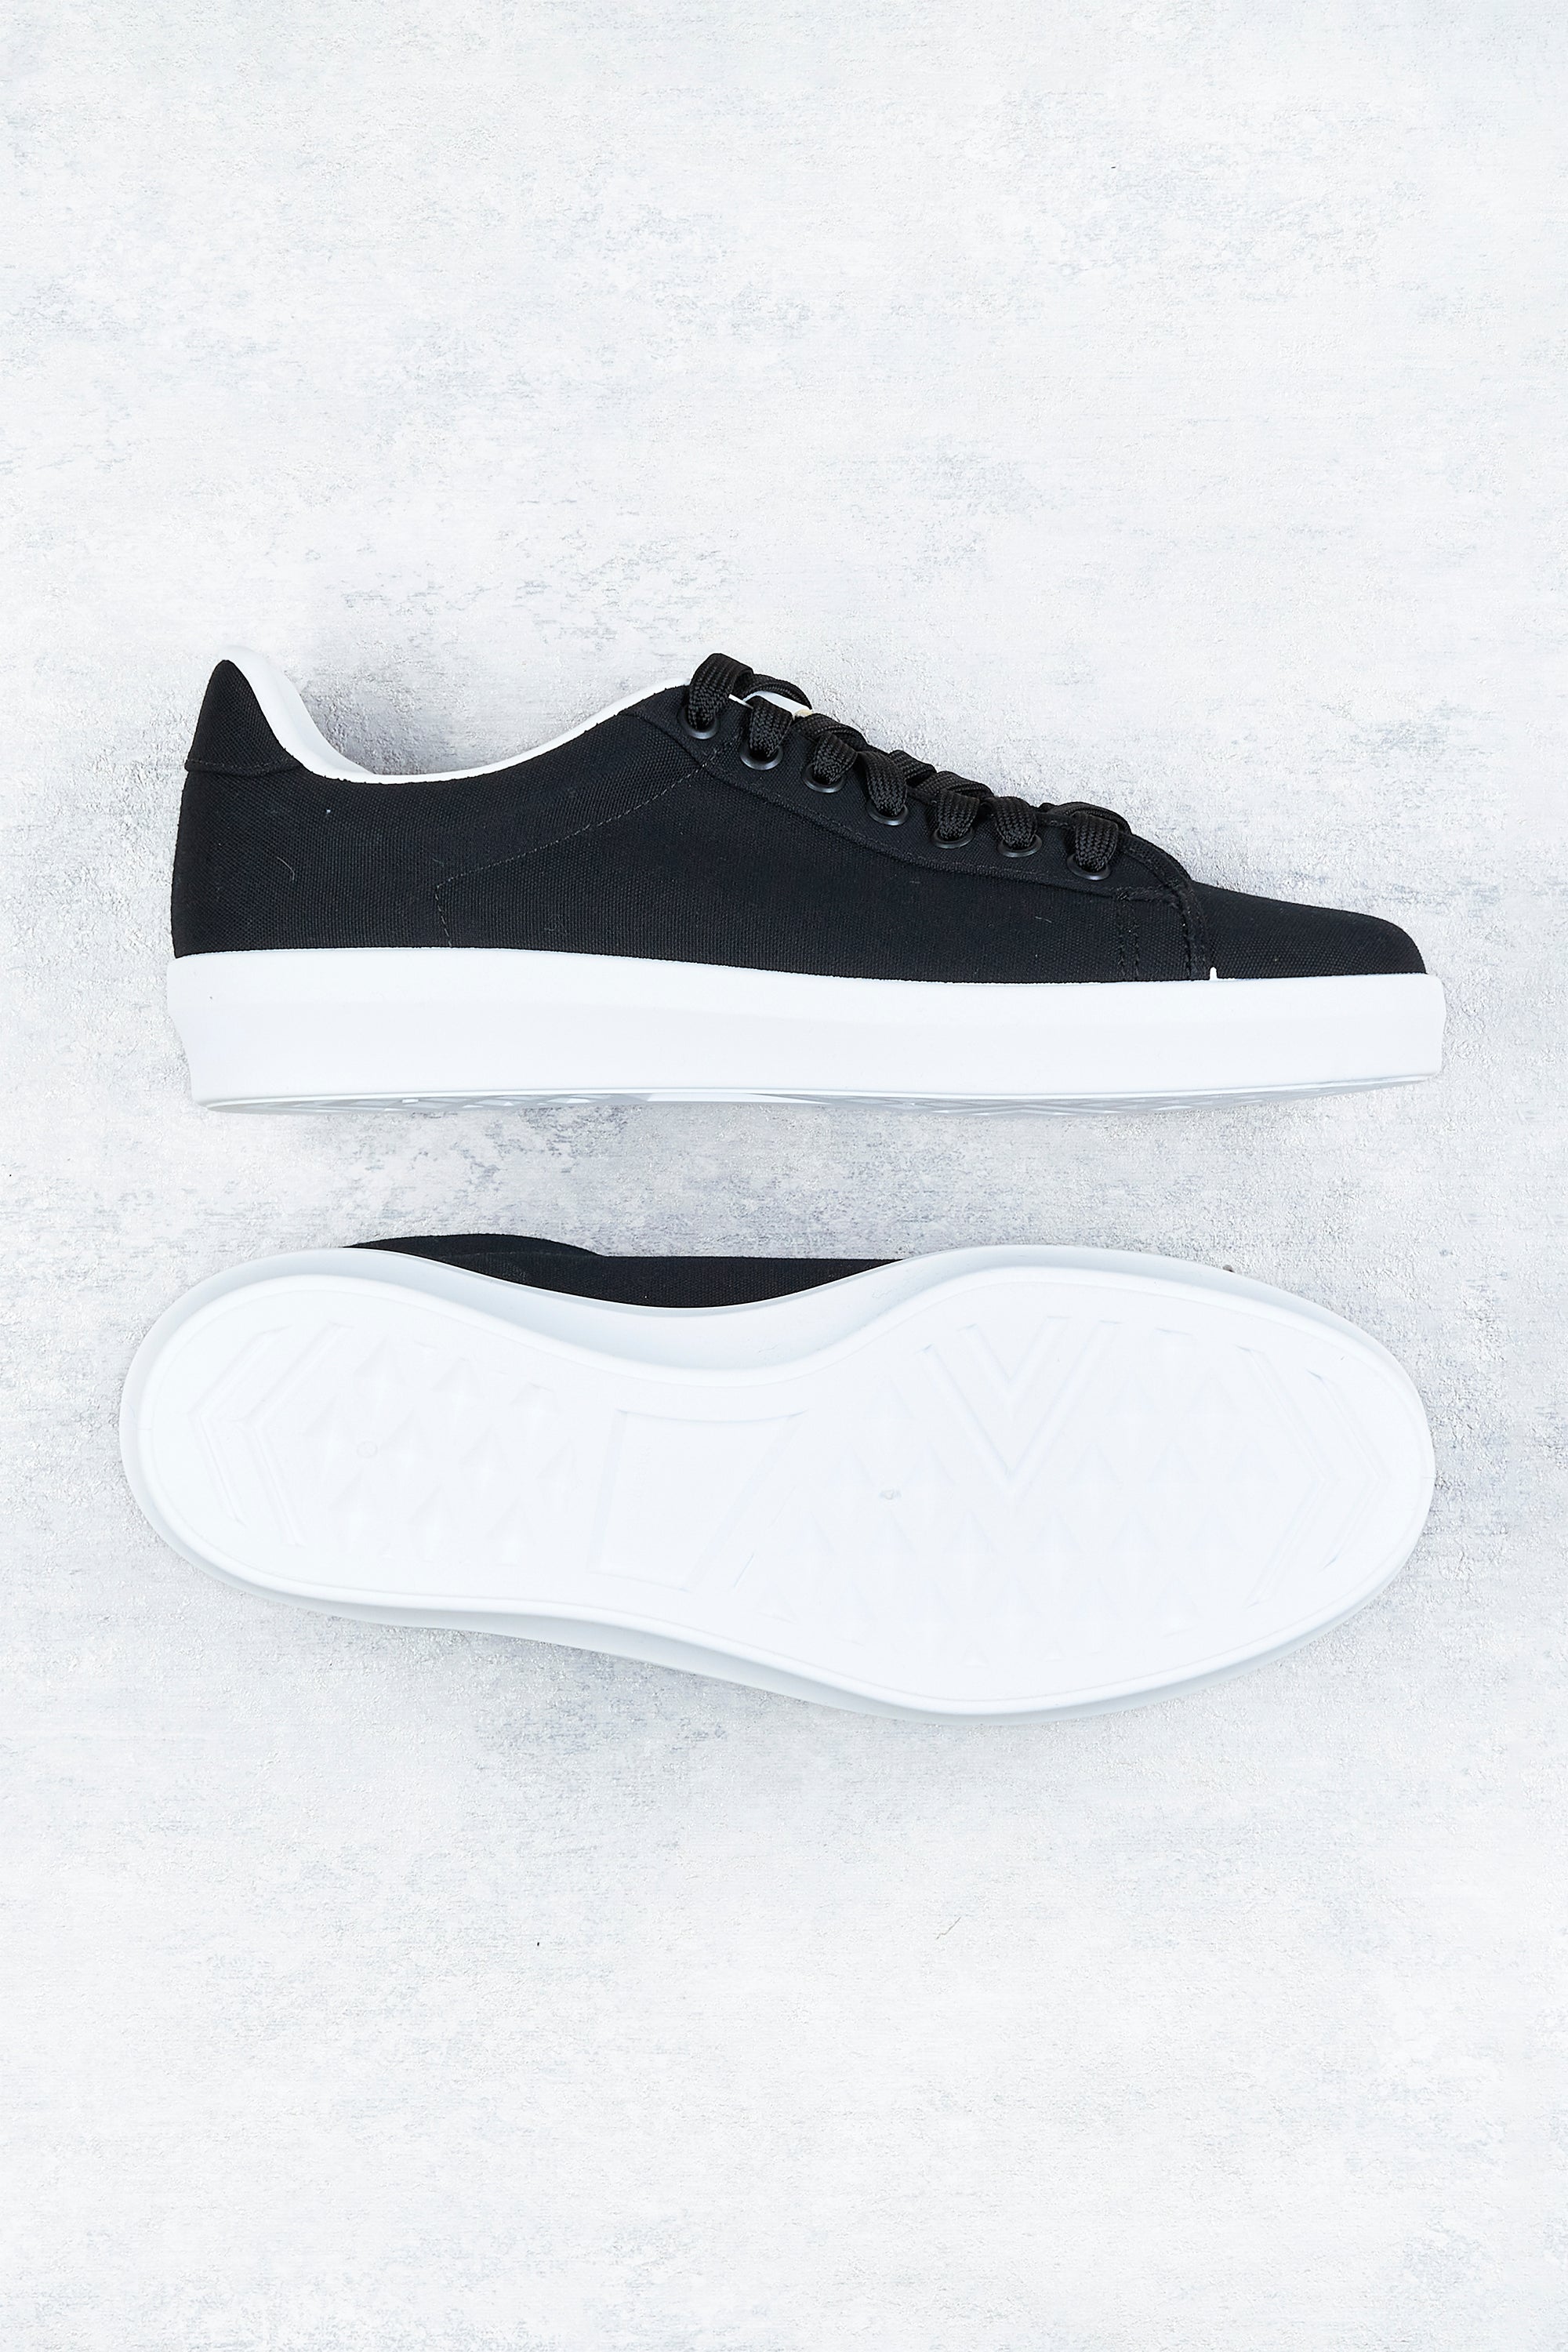 Moonstar Raly Vul Black Canvas Shoes